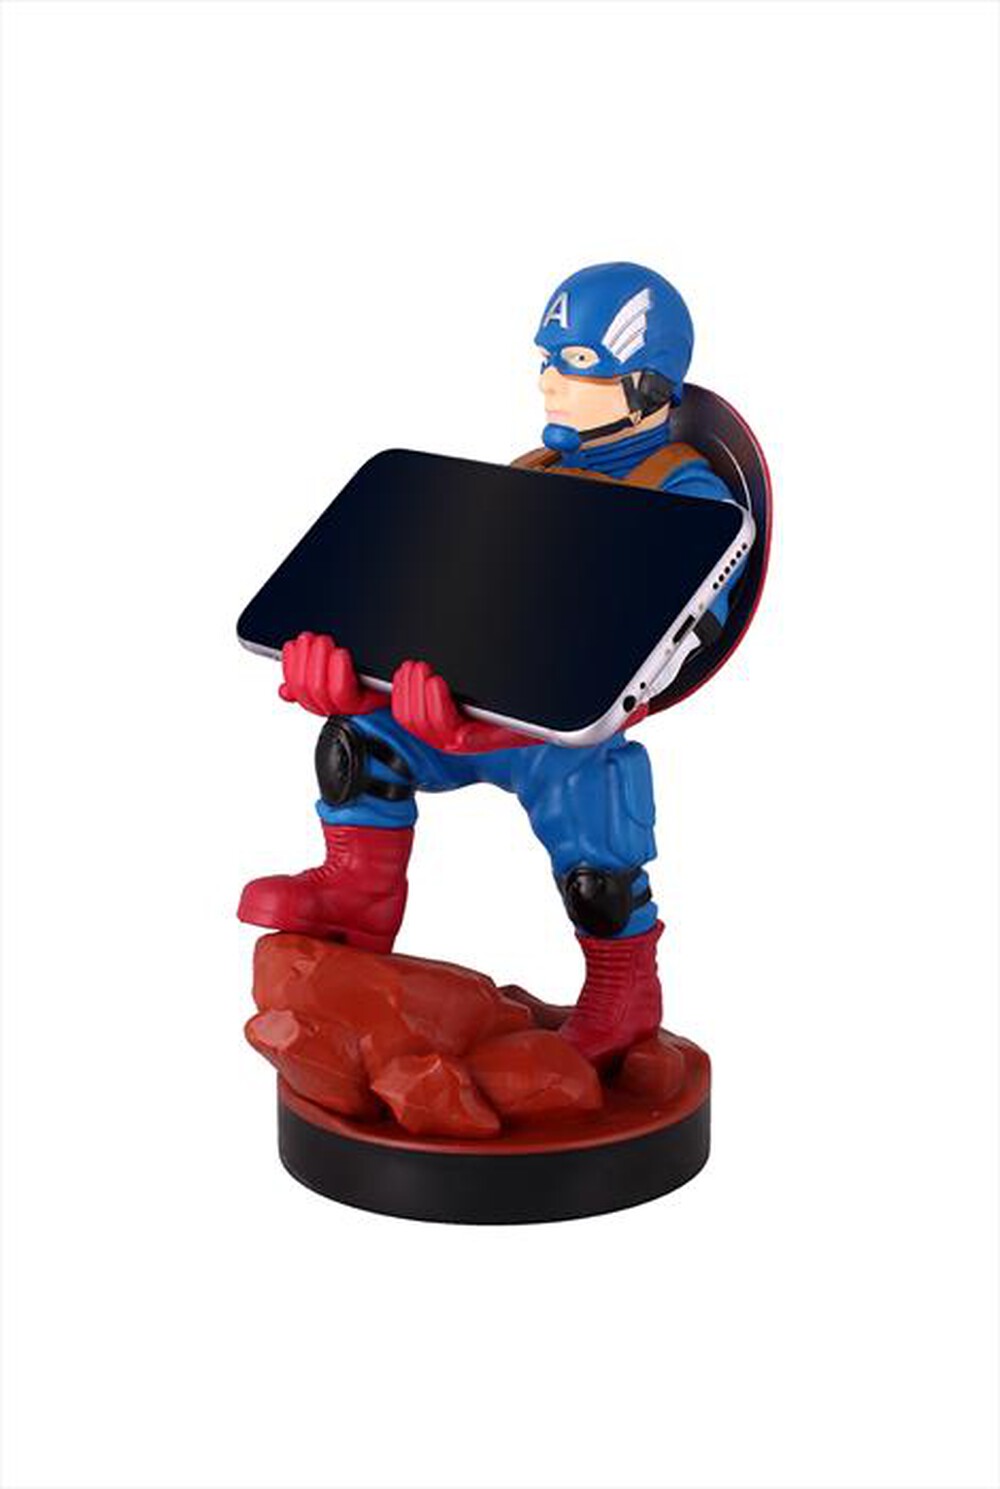 "EXQUISITE GAMING - CAPTAIN AMERICA CABLE GUY"